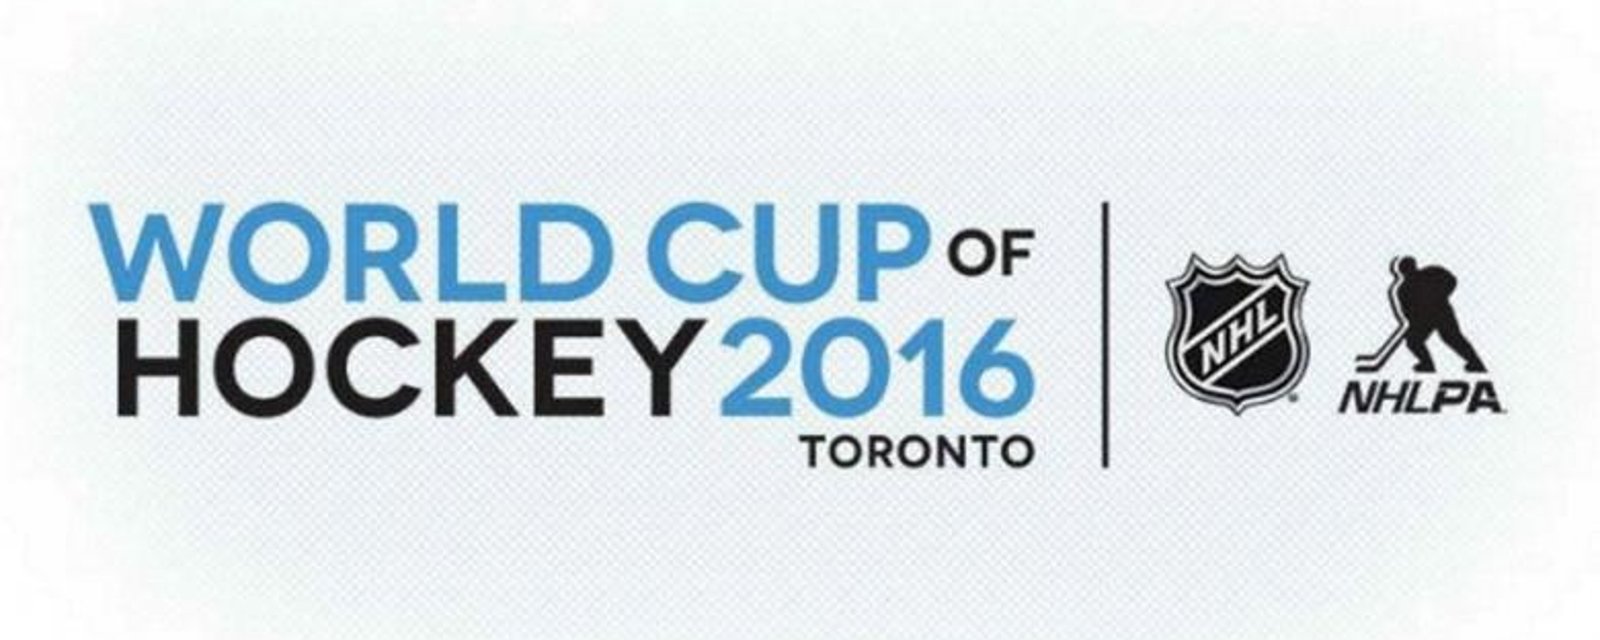 Breaking: Crazy rumors that an entire country could boycott the first World Cup of Hockey.